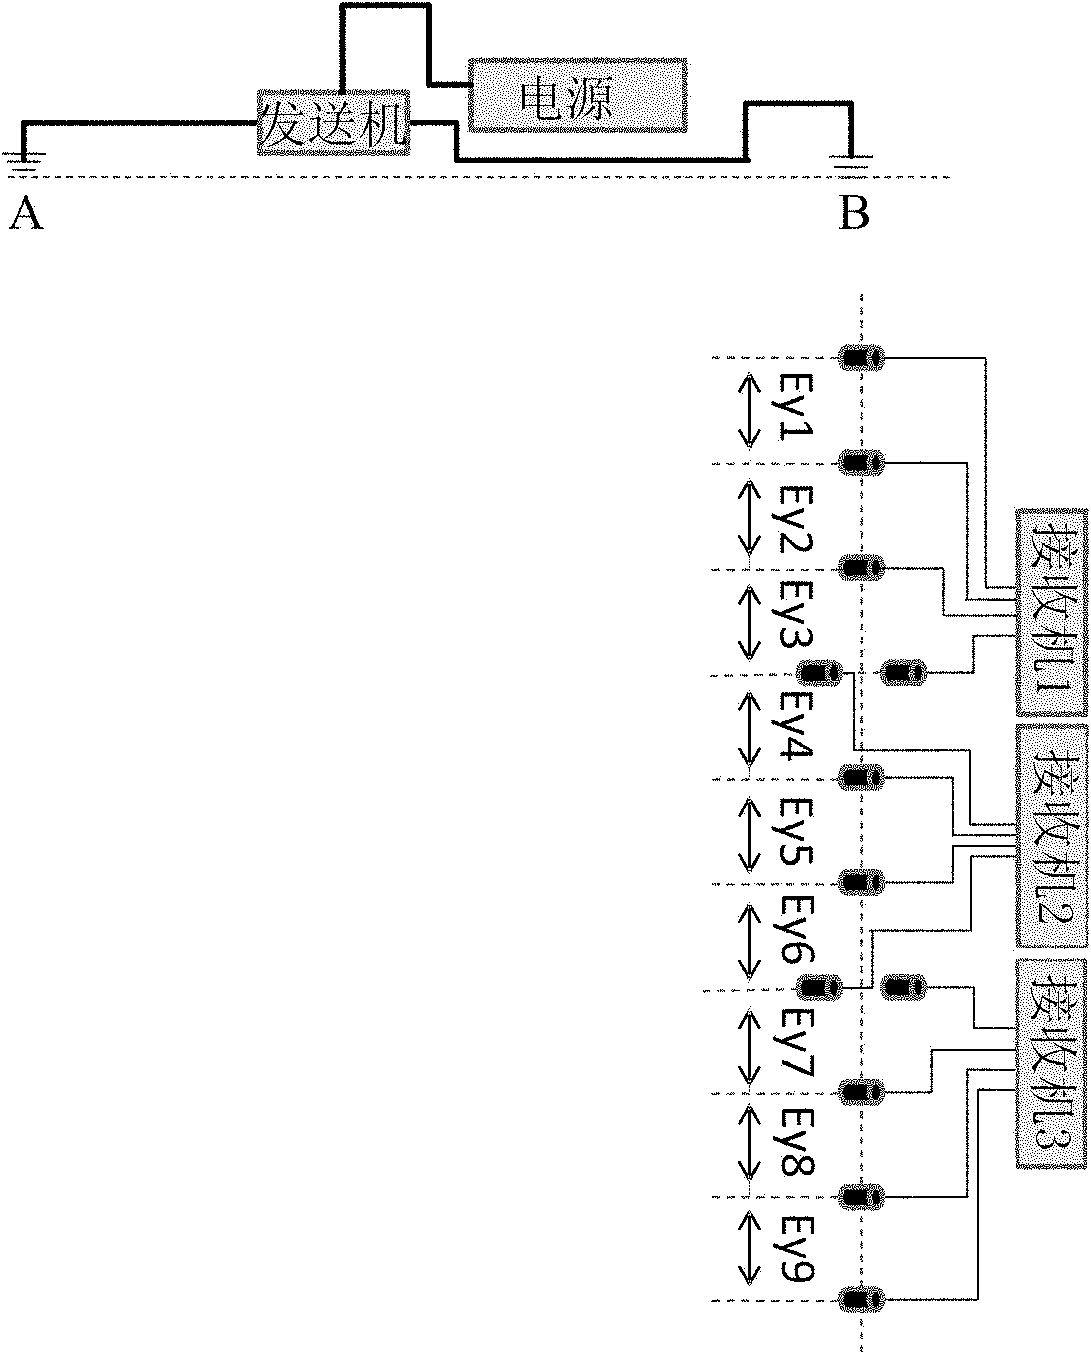 Electrical sounding method for whole-region couple source frequency domain